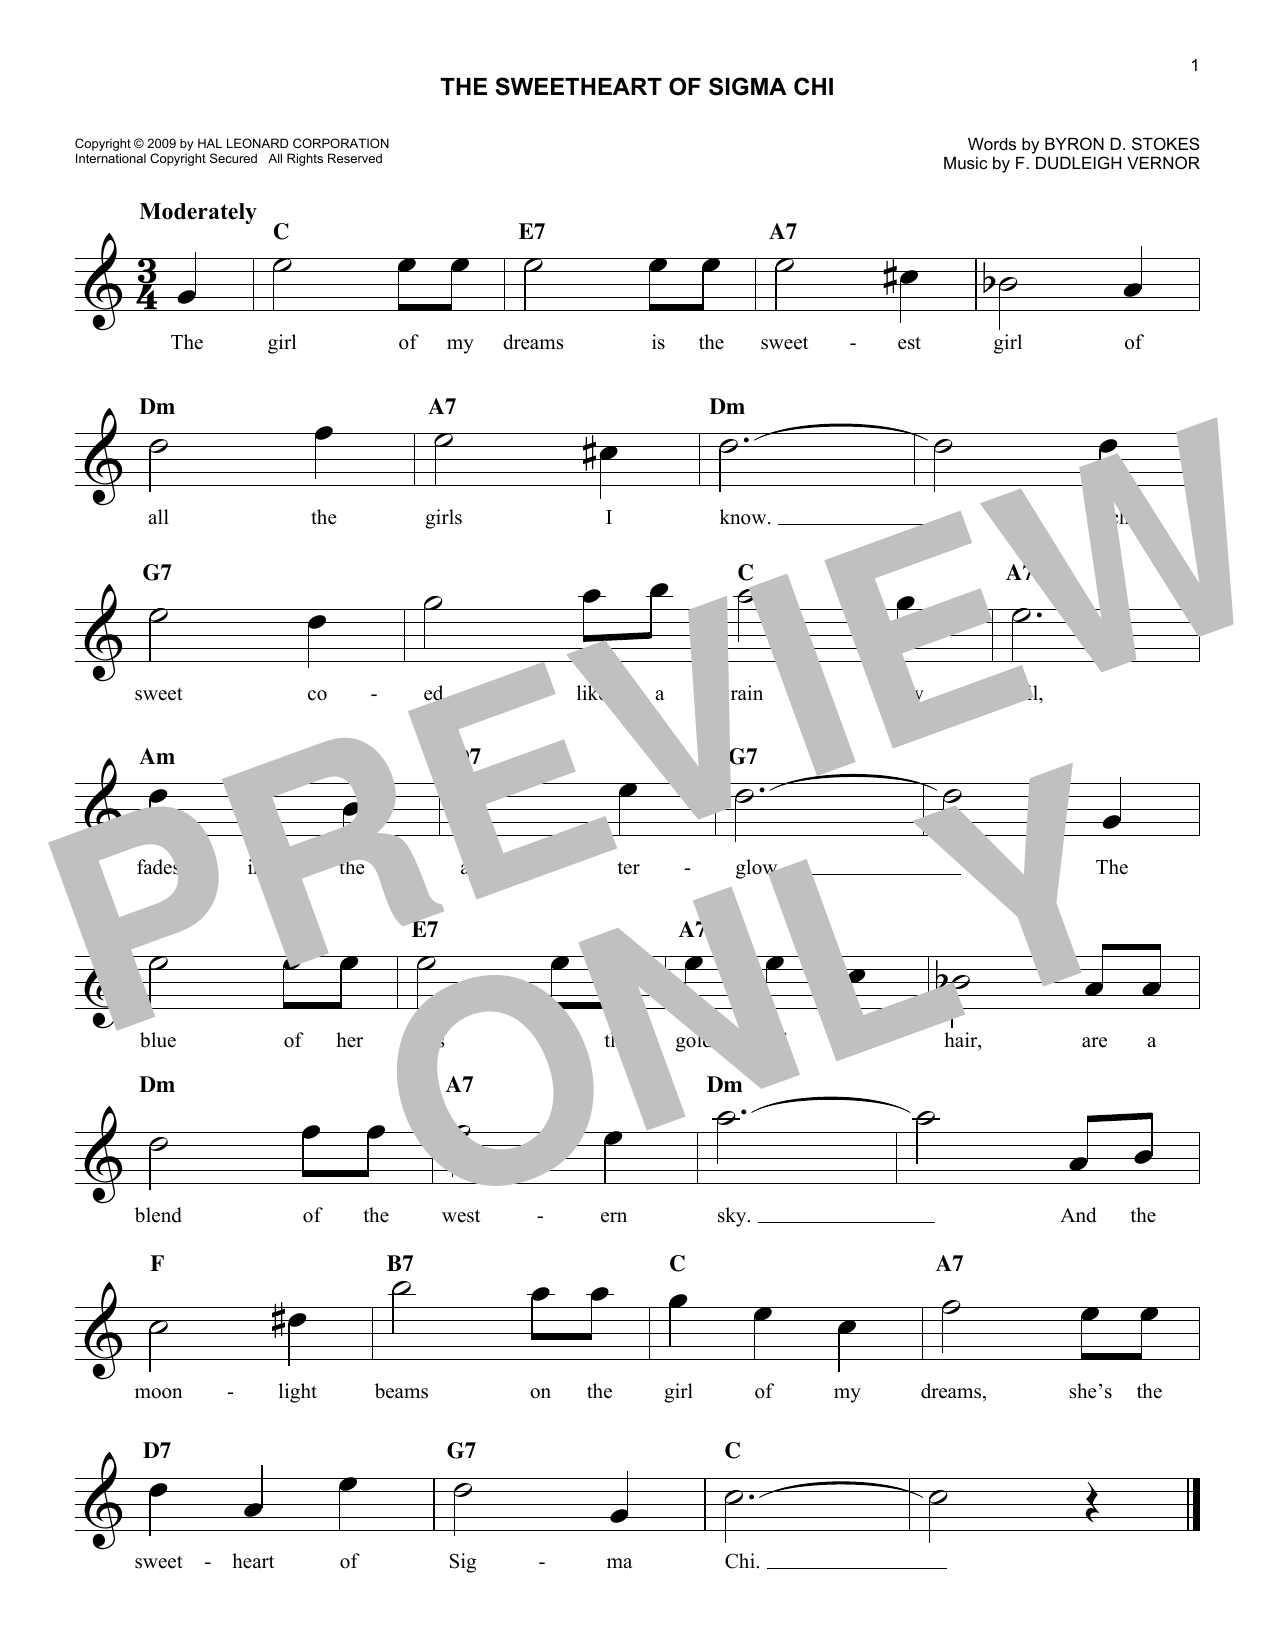 F. Dudleigh Vernor The Sweetheart Of Sigma Chi sheet music notes and chords. Download Printable PDF.